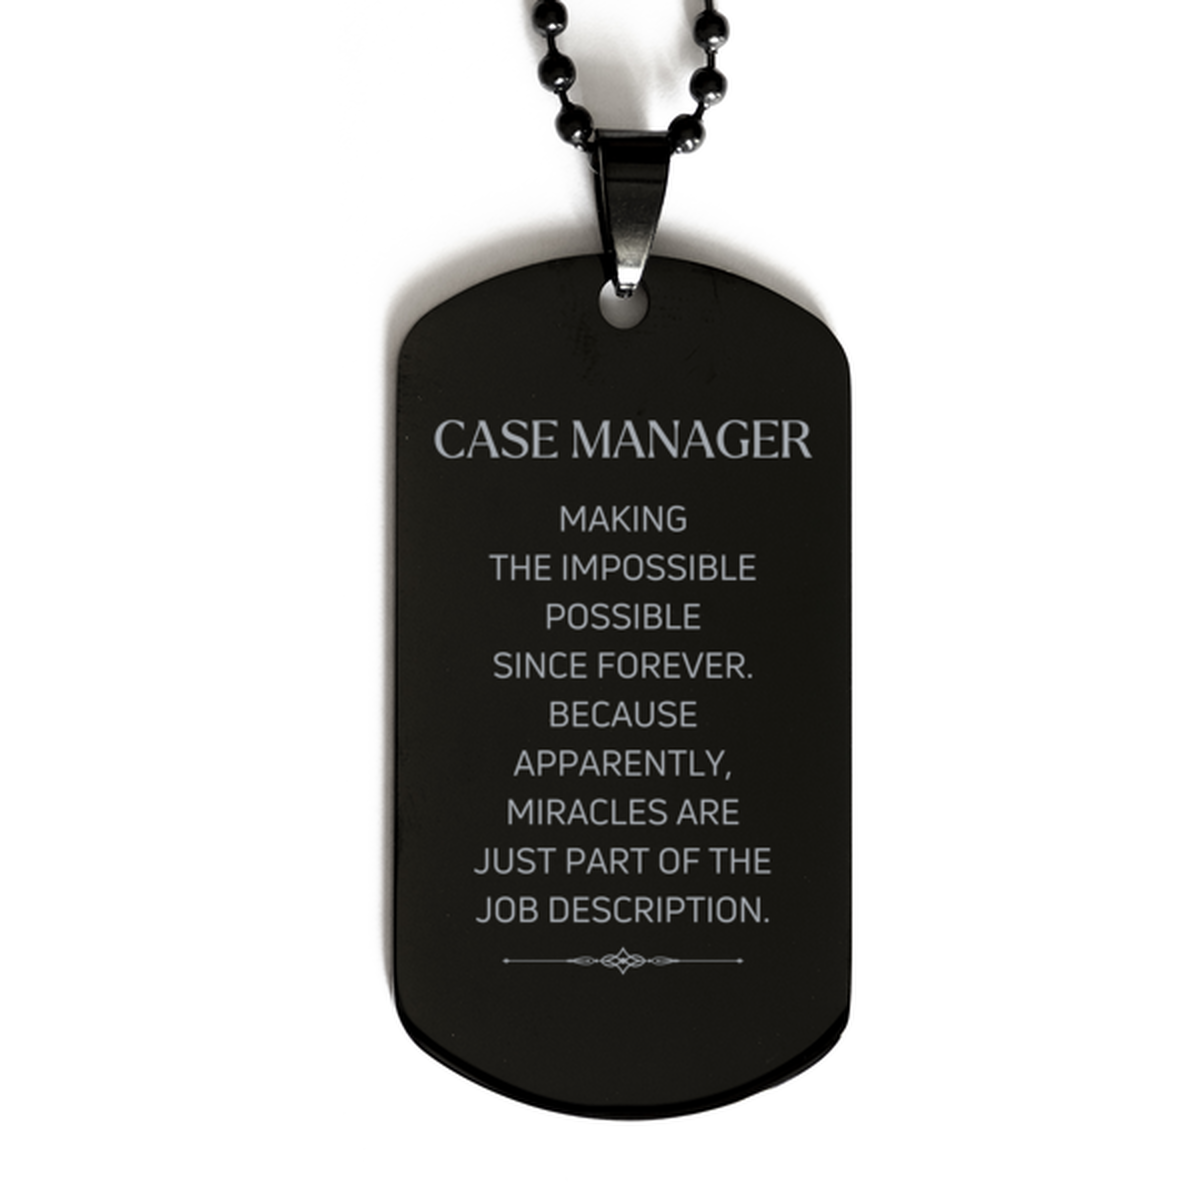 Funny Case Manager Gifts, Miracles are just part of the job description, Inspirational Birthday Black Dog Tag For Case Manager, Men, Women, Coworkers, Friends, Boss